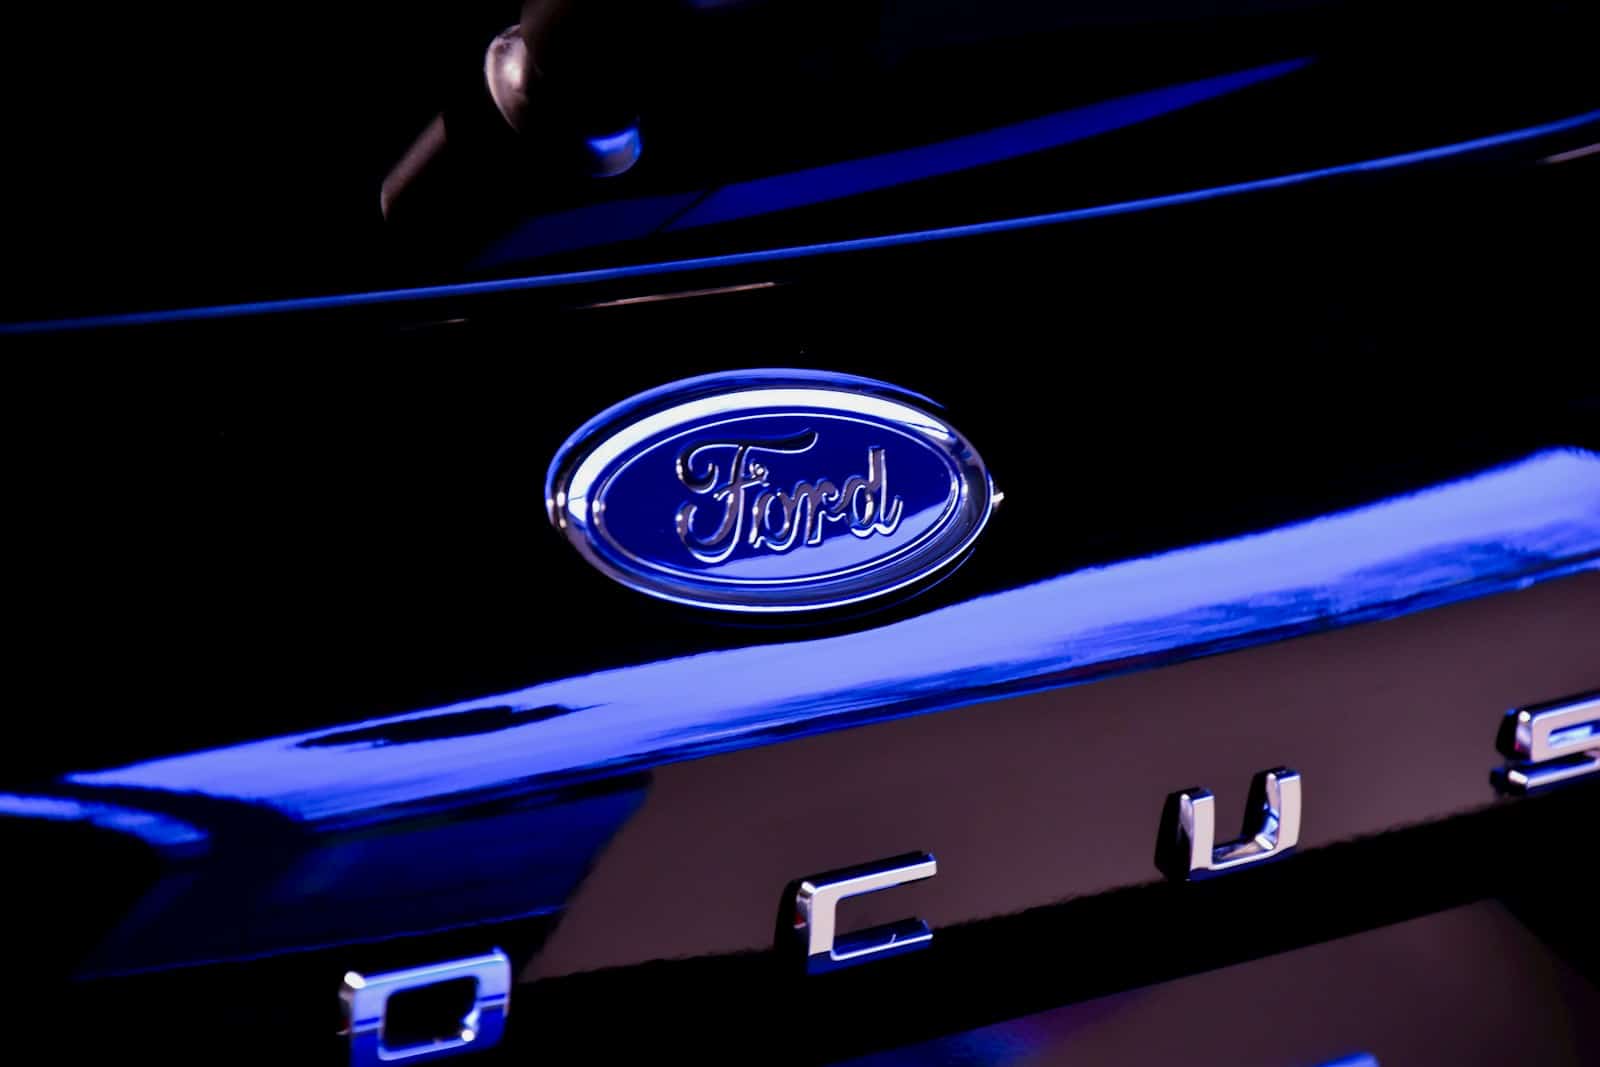 blue and silver ford logo